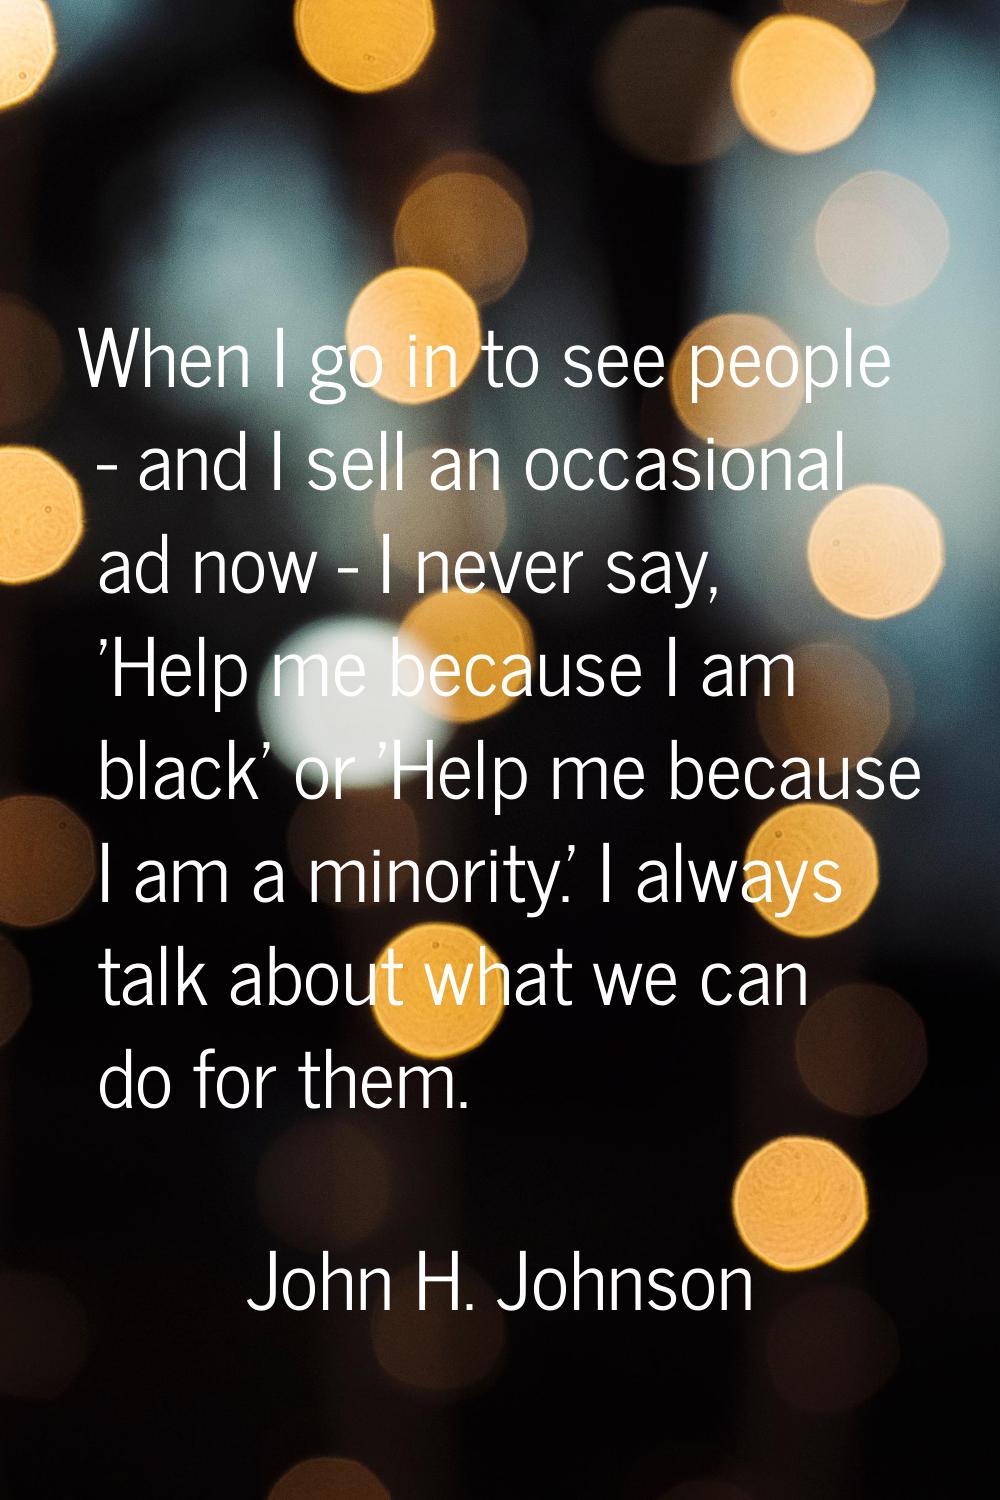 When I go in to see people - and I sell an occasional ad now - I never say, 'Help me because I am b